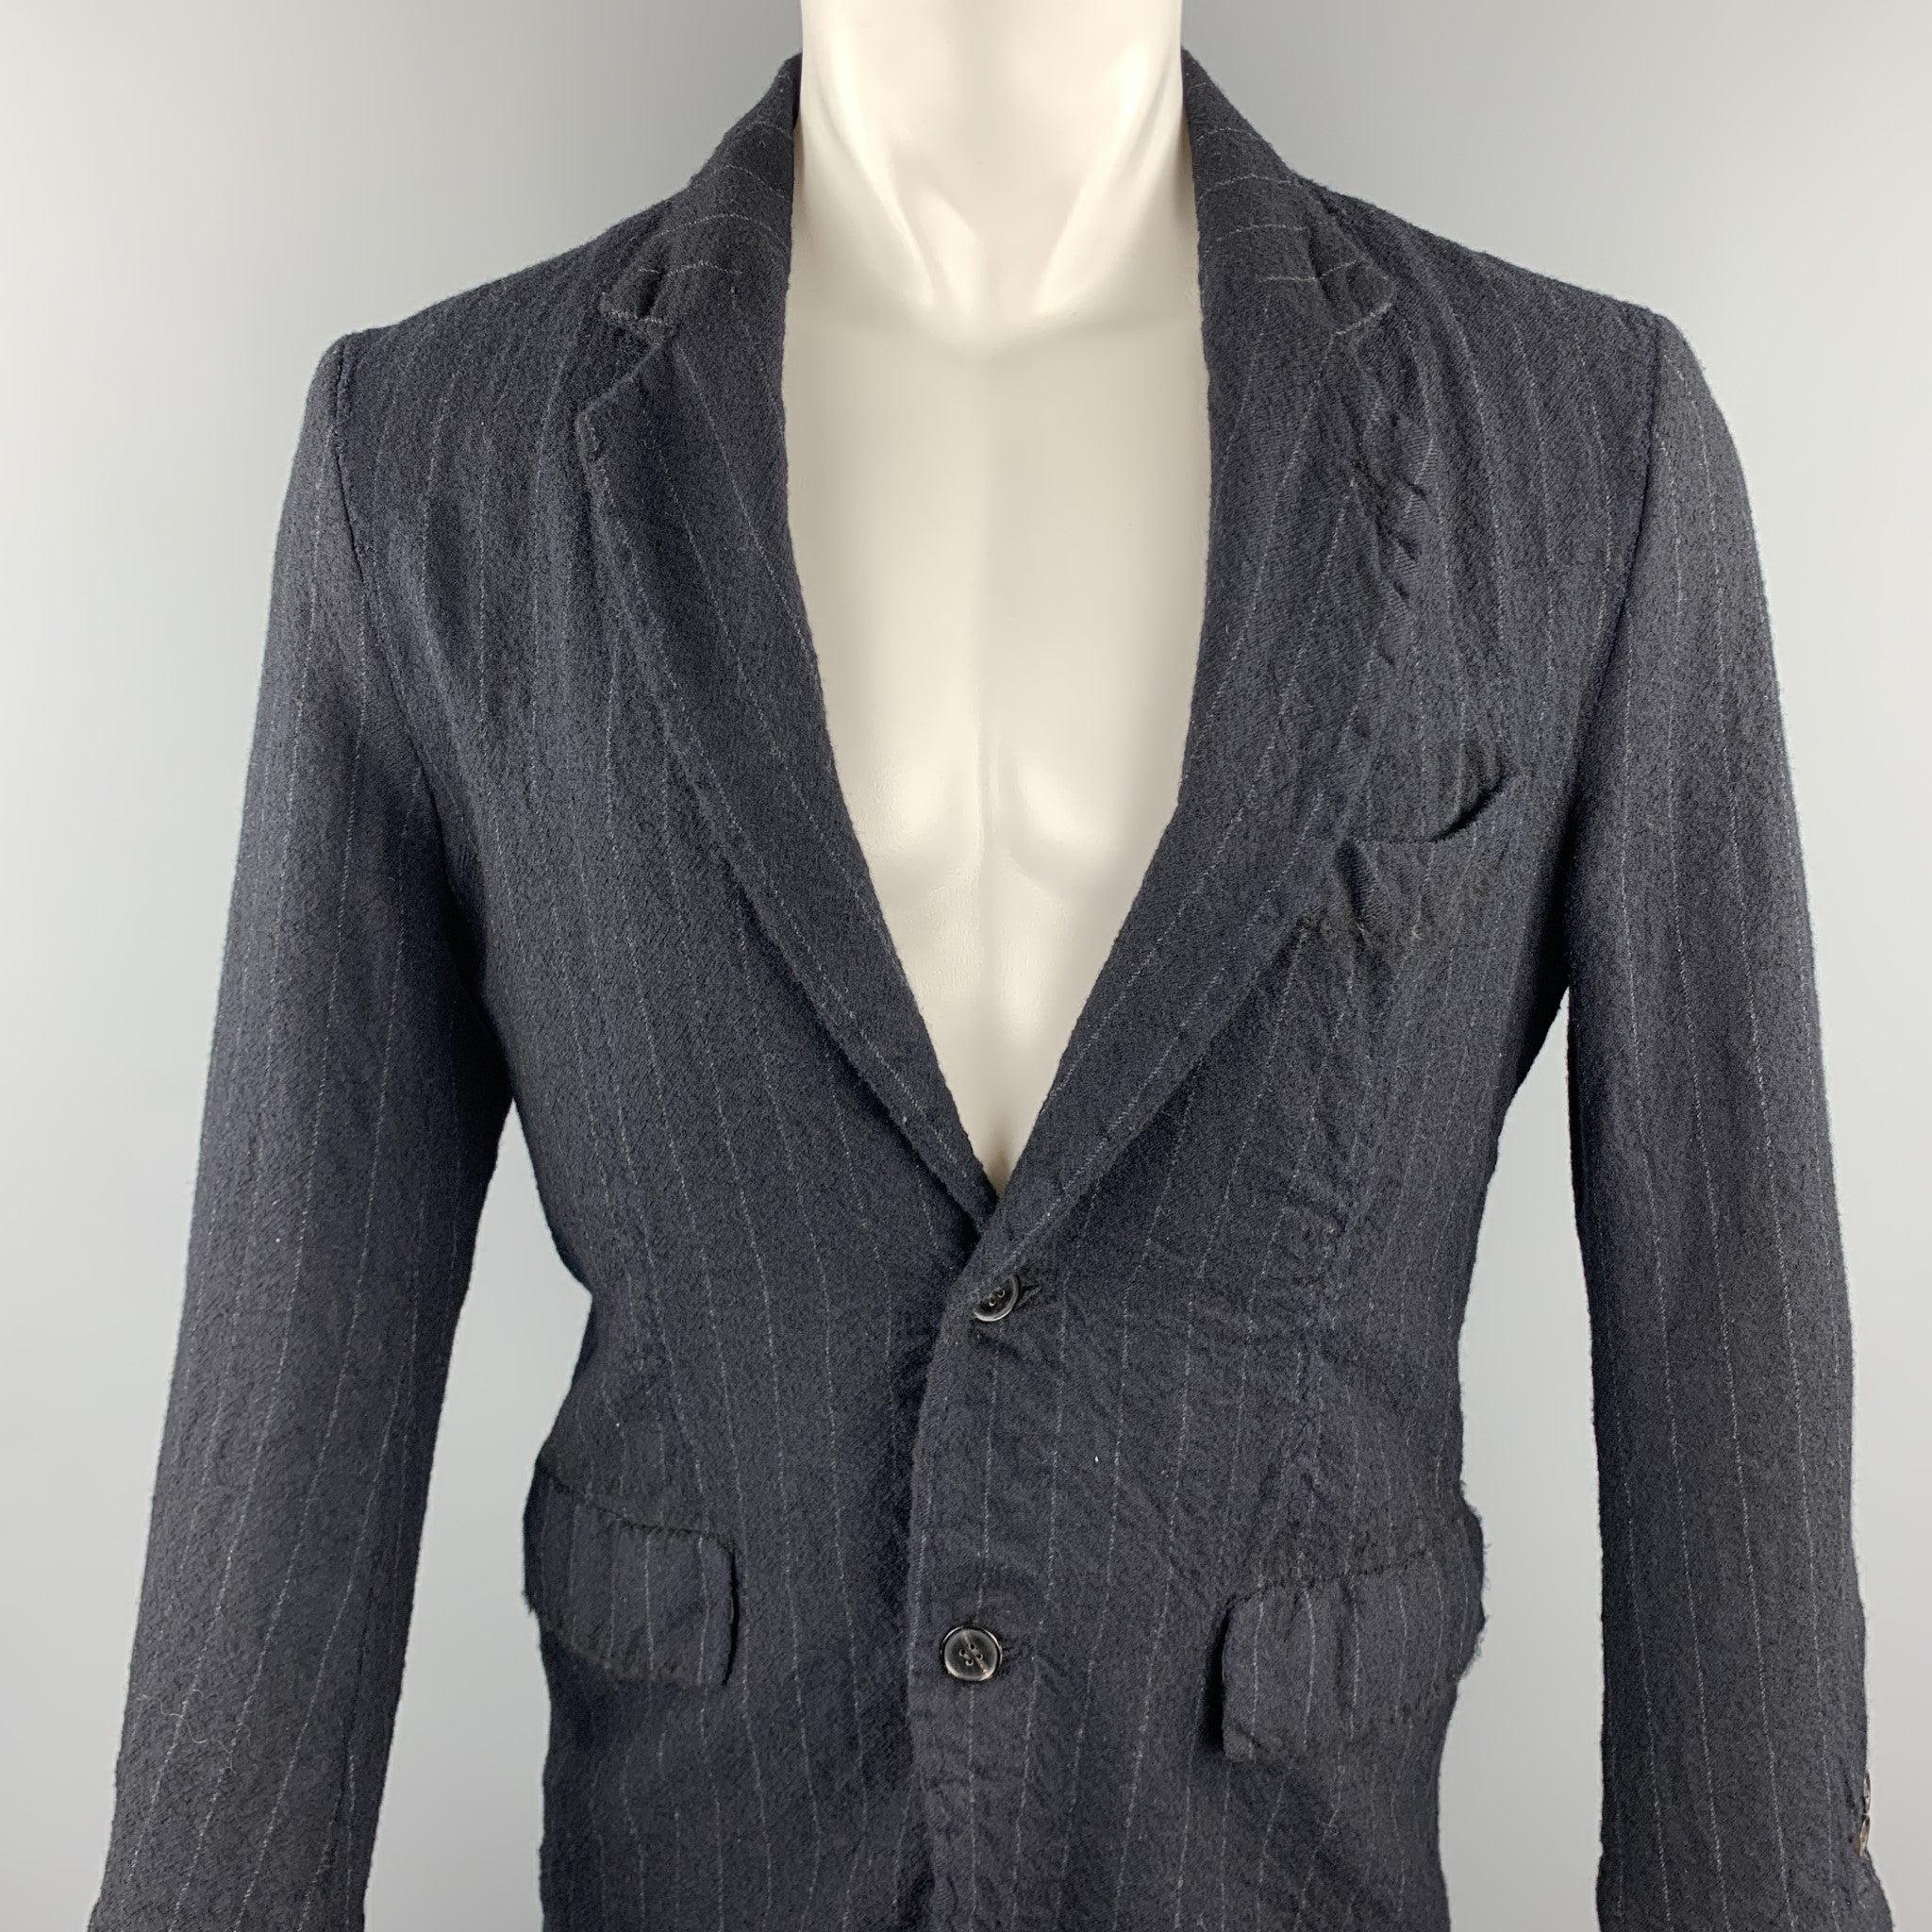 08SIRCUS jacket comes in a navy chalk stripe wool featuring a notch lapel style, flap pockets, and a two button closure. Made in Japan.Very Good
Pre-Owned Condition. 

Marked:   2/48 

Measurements: 
 
Shoulder: 19 inches 
Chest: 42 inches 
Sleeve: